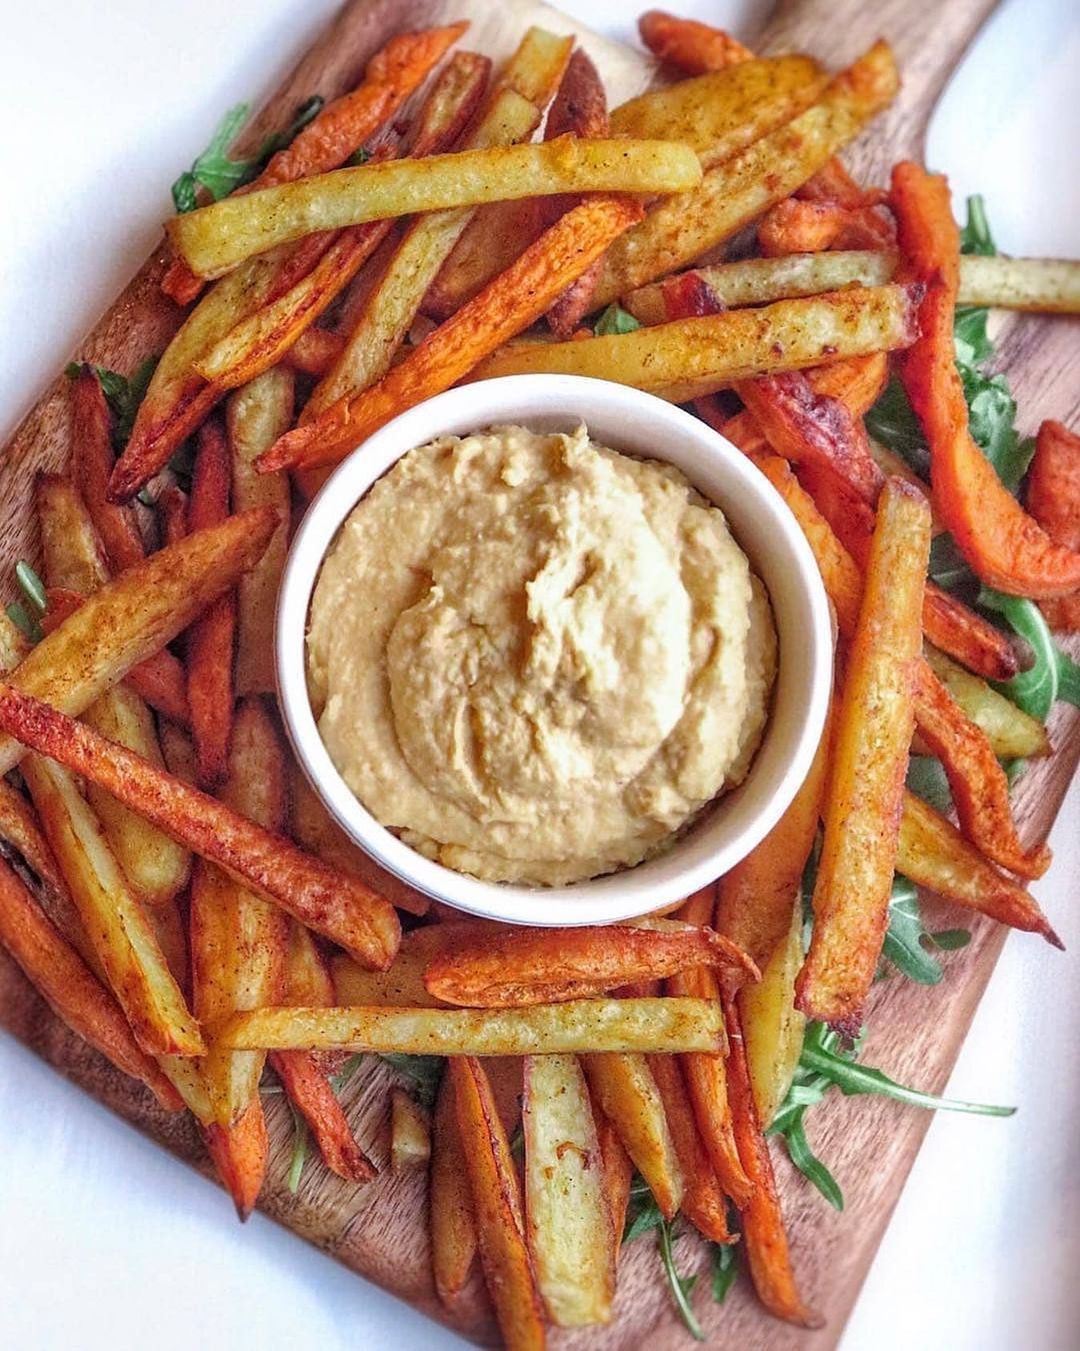 ​Spiced Fries with Roasted Garlic Hummus